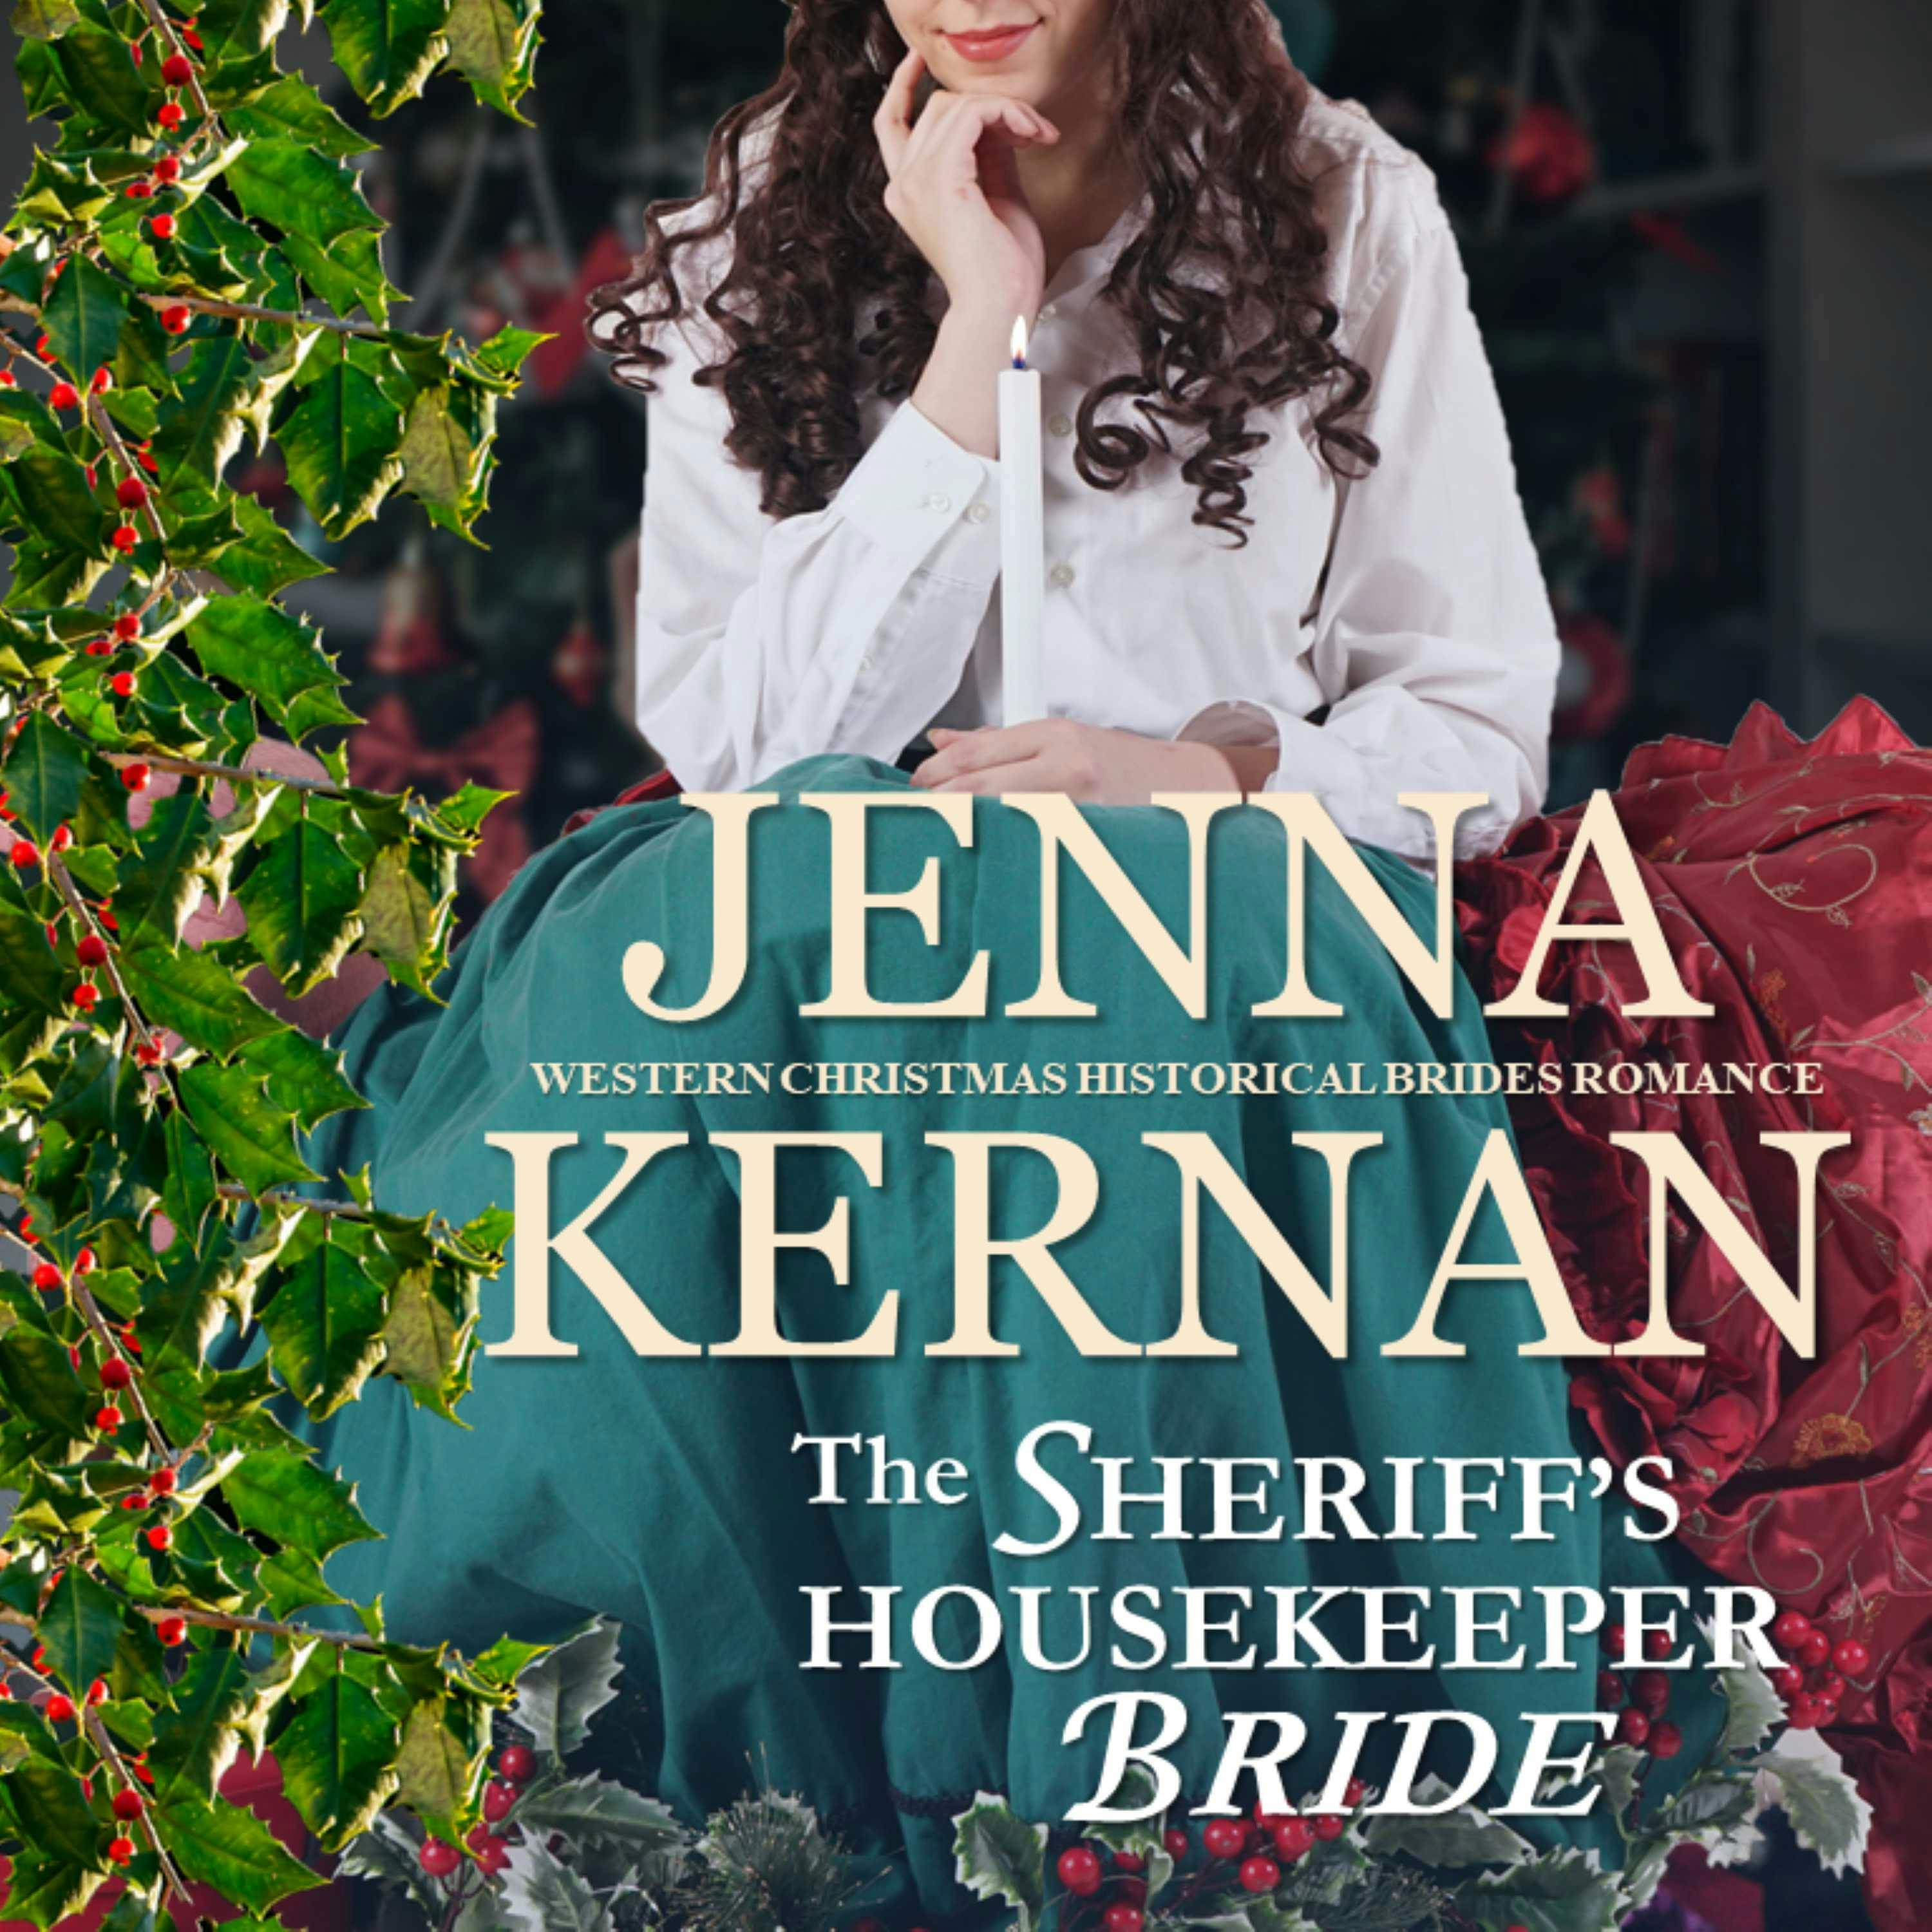 The Sheriff's Housekeeper Bride: Western Christmas Historical Brides Romance - undefined